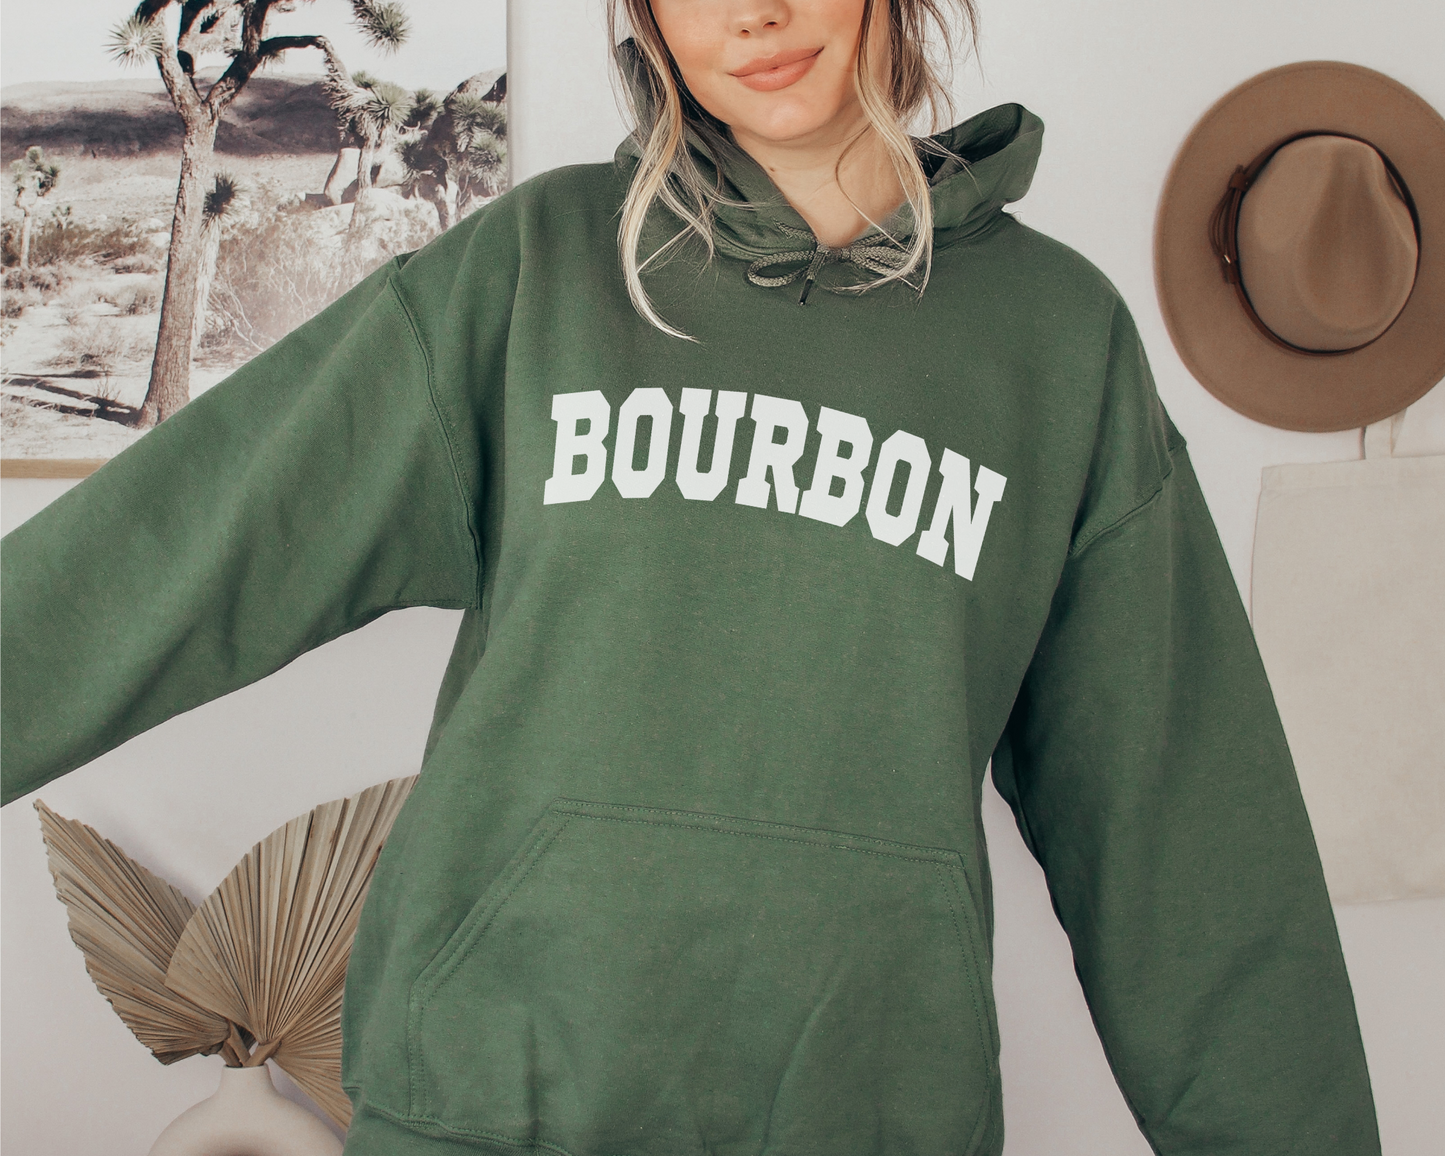 Bourbon Hoodie in Military Green on a Female